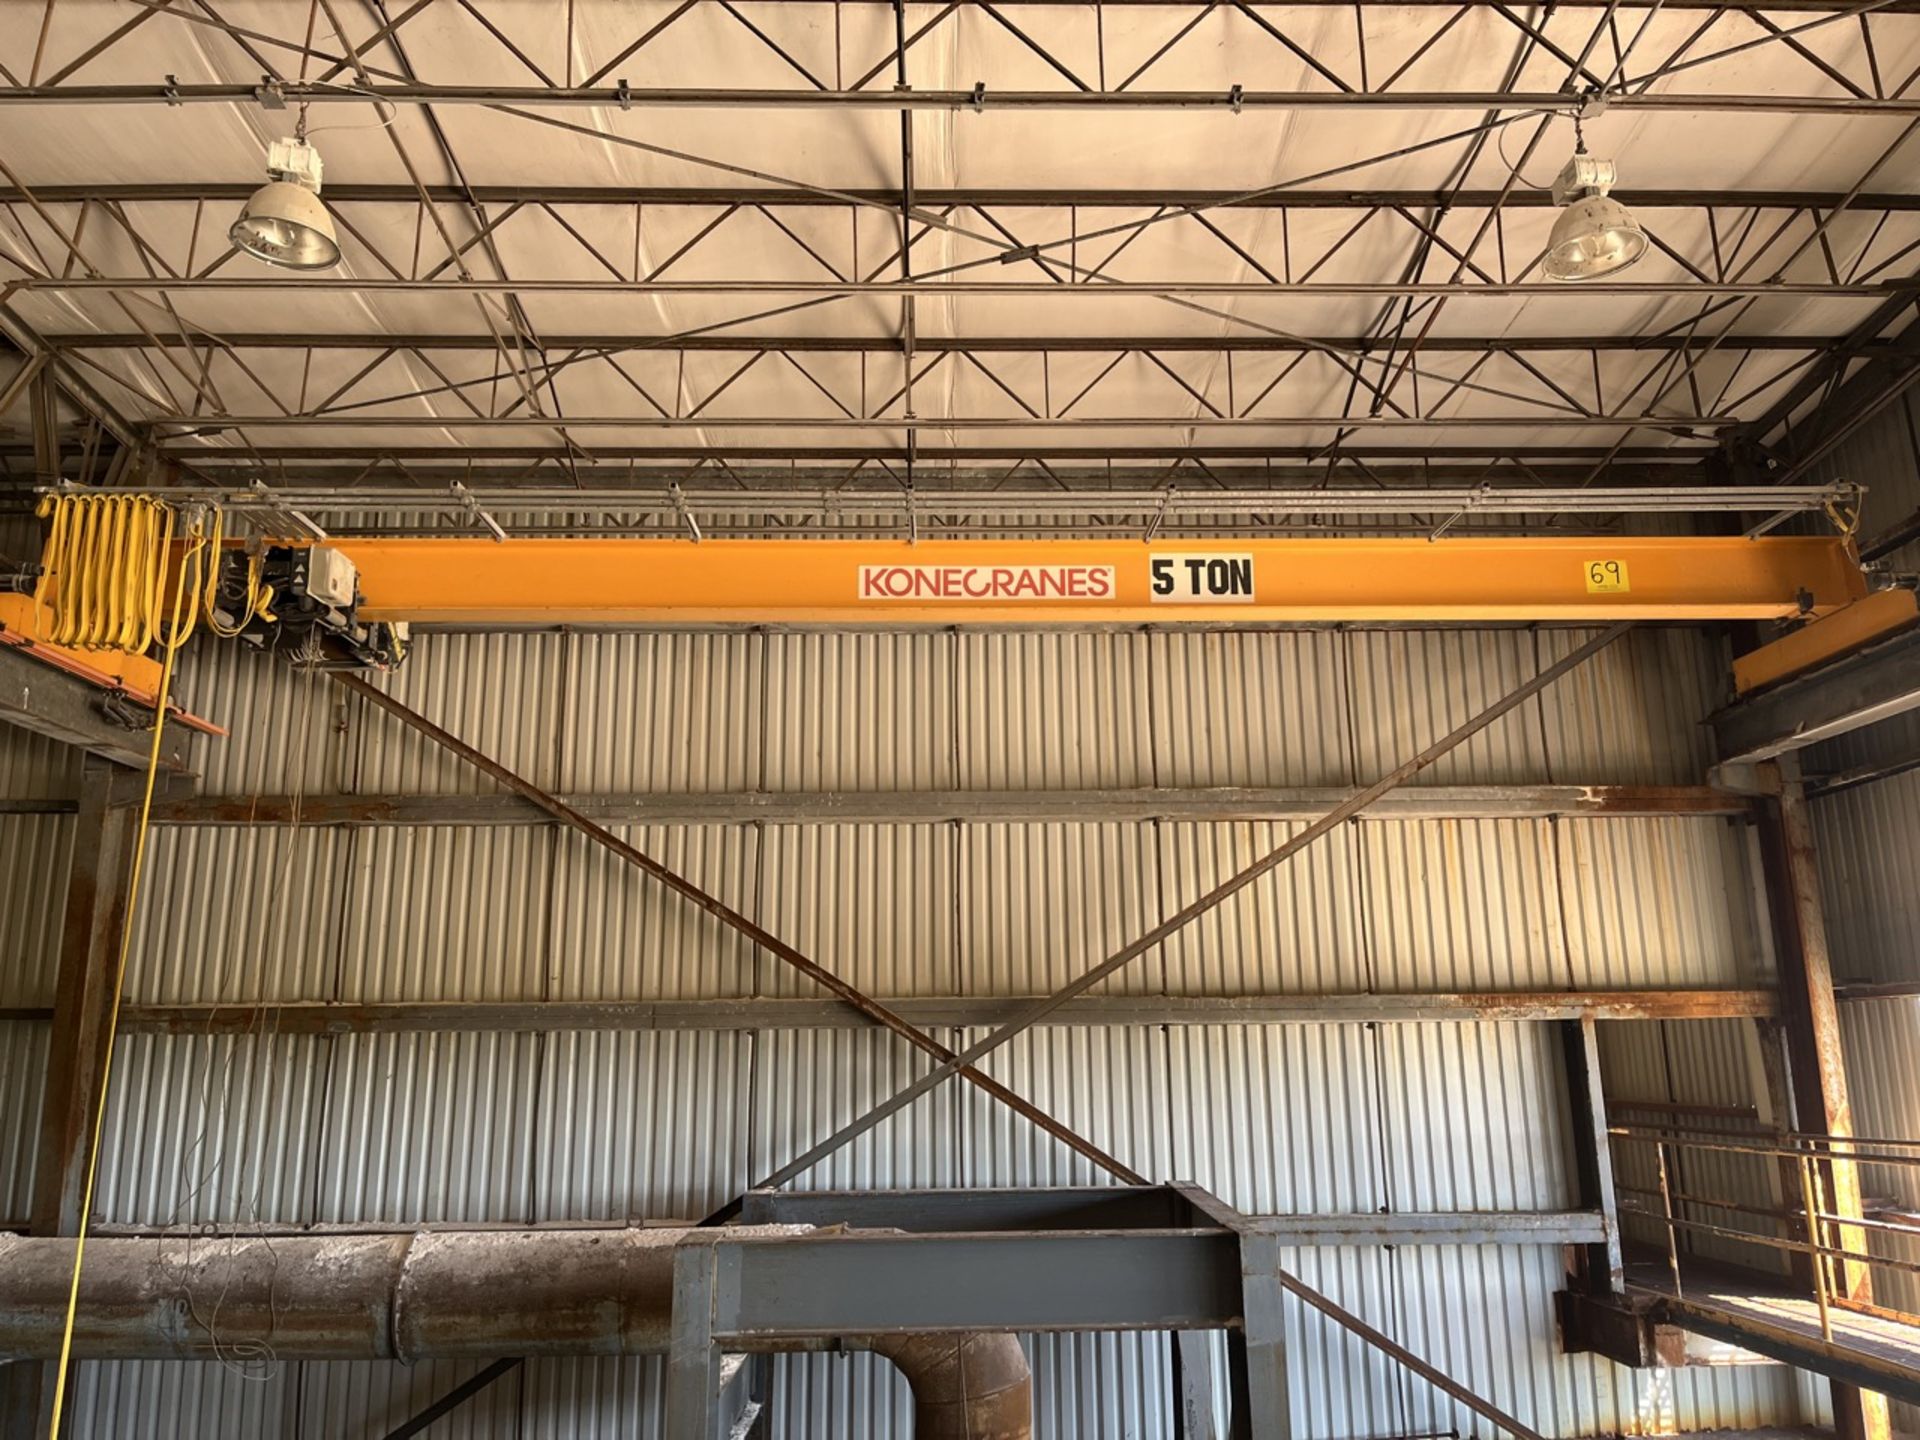 Konecranes overhead crane with a load capacity of 5 tons and a 15-meter lifting capacity; includes - Image 4 of 12